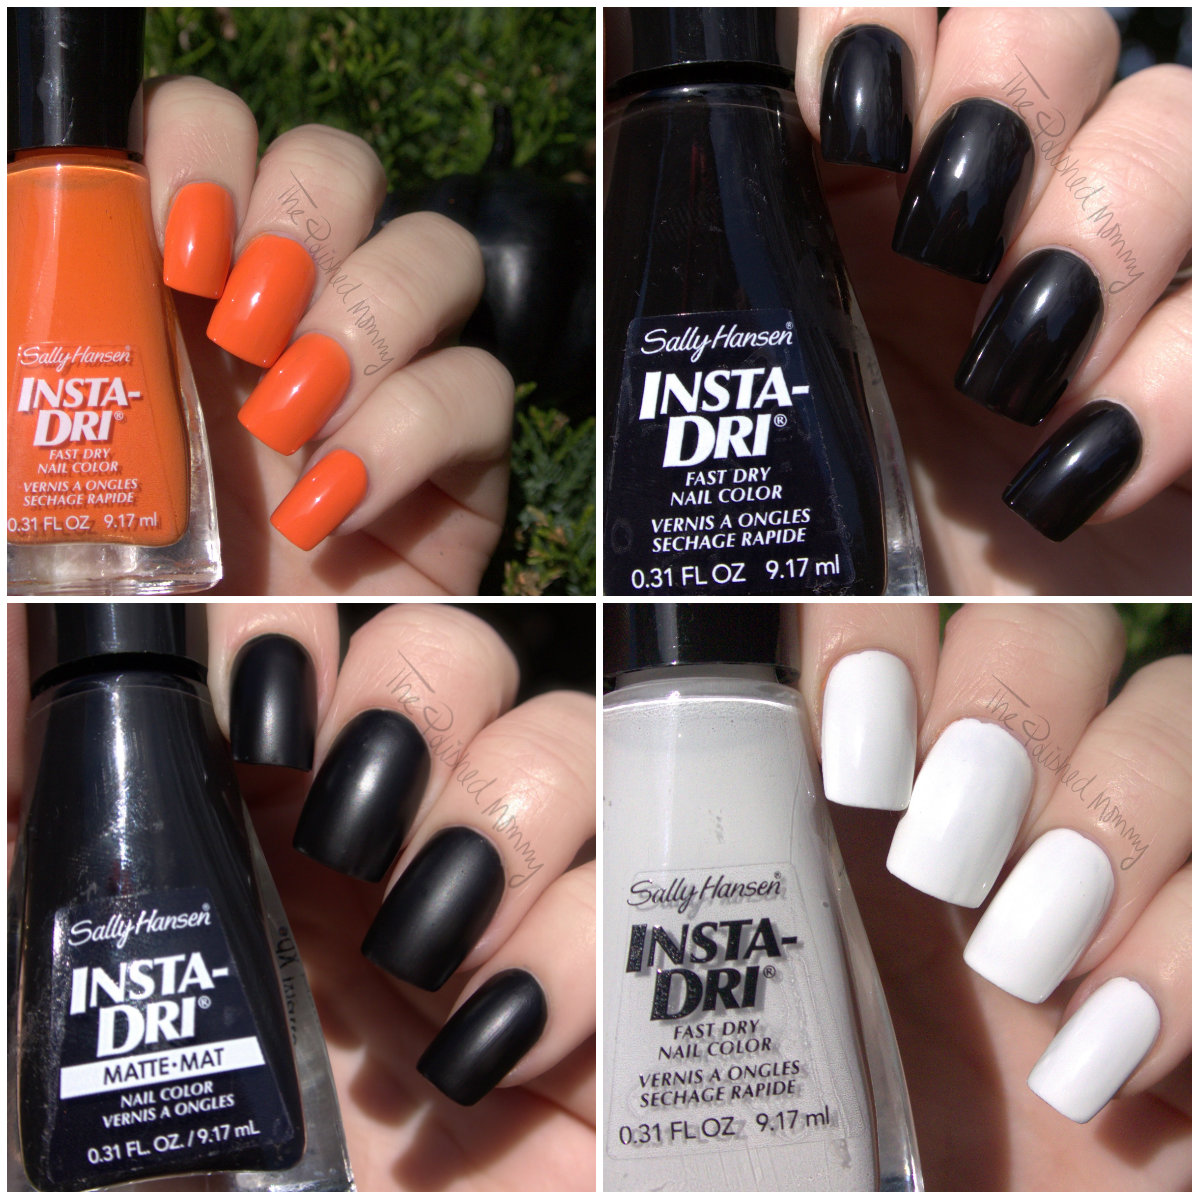 Sally Hansen Halloween 2014: Insta-Dri Collection – The Polished Mommy